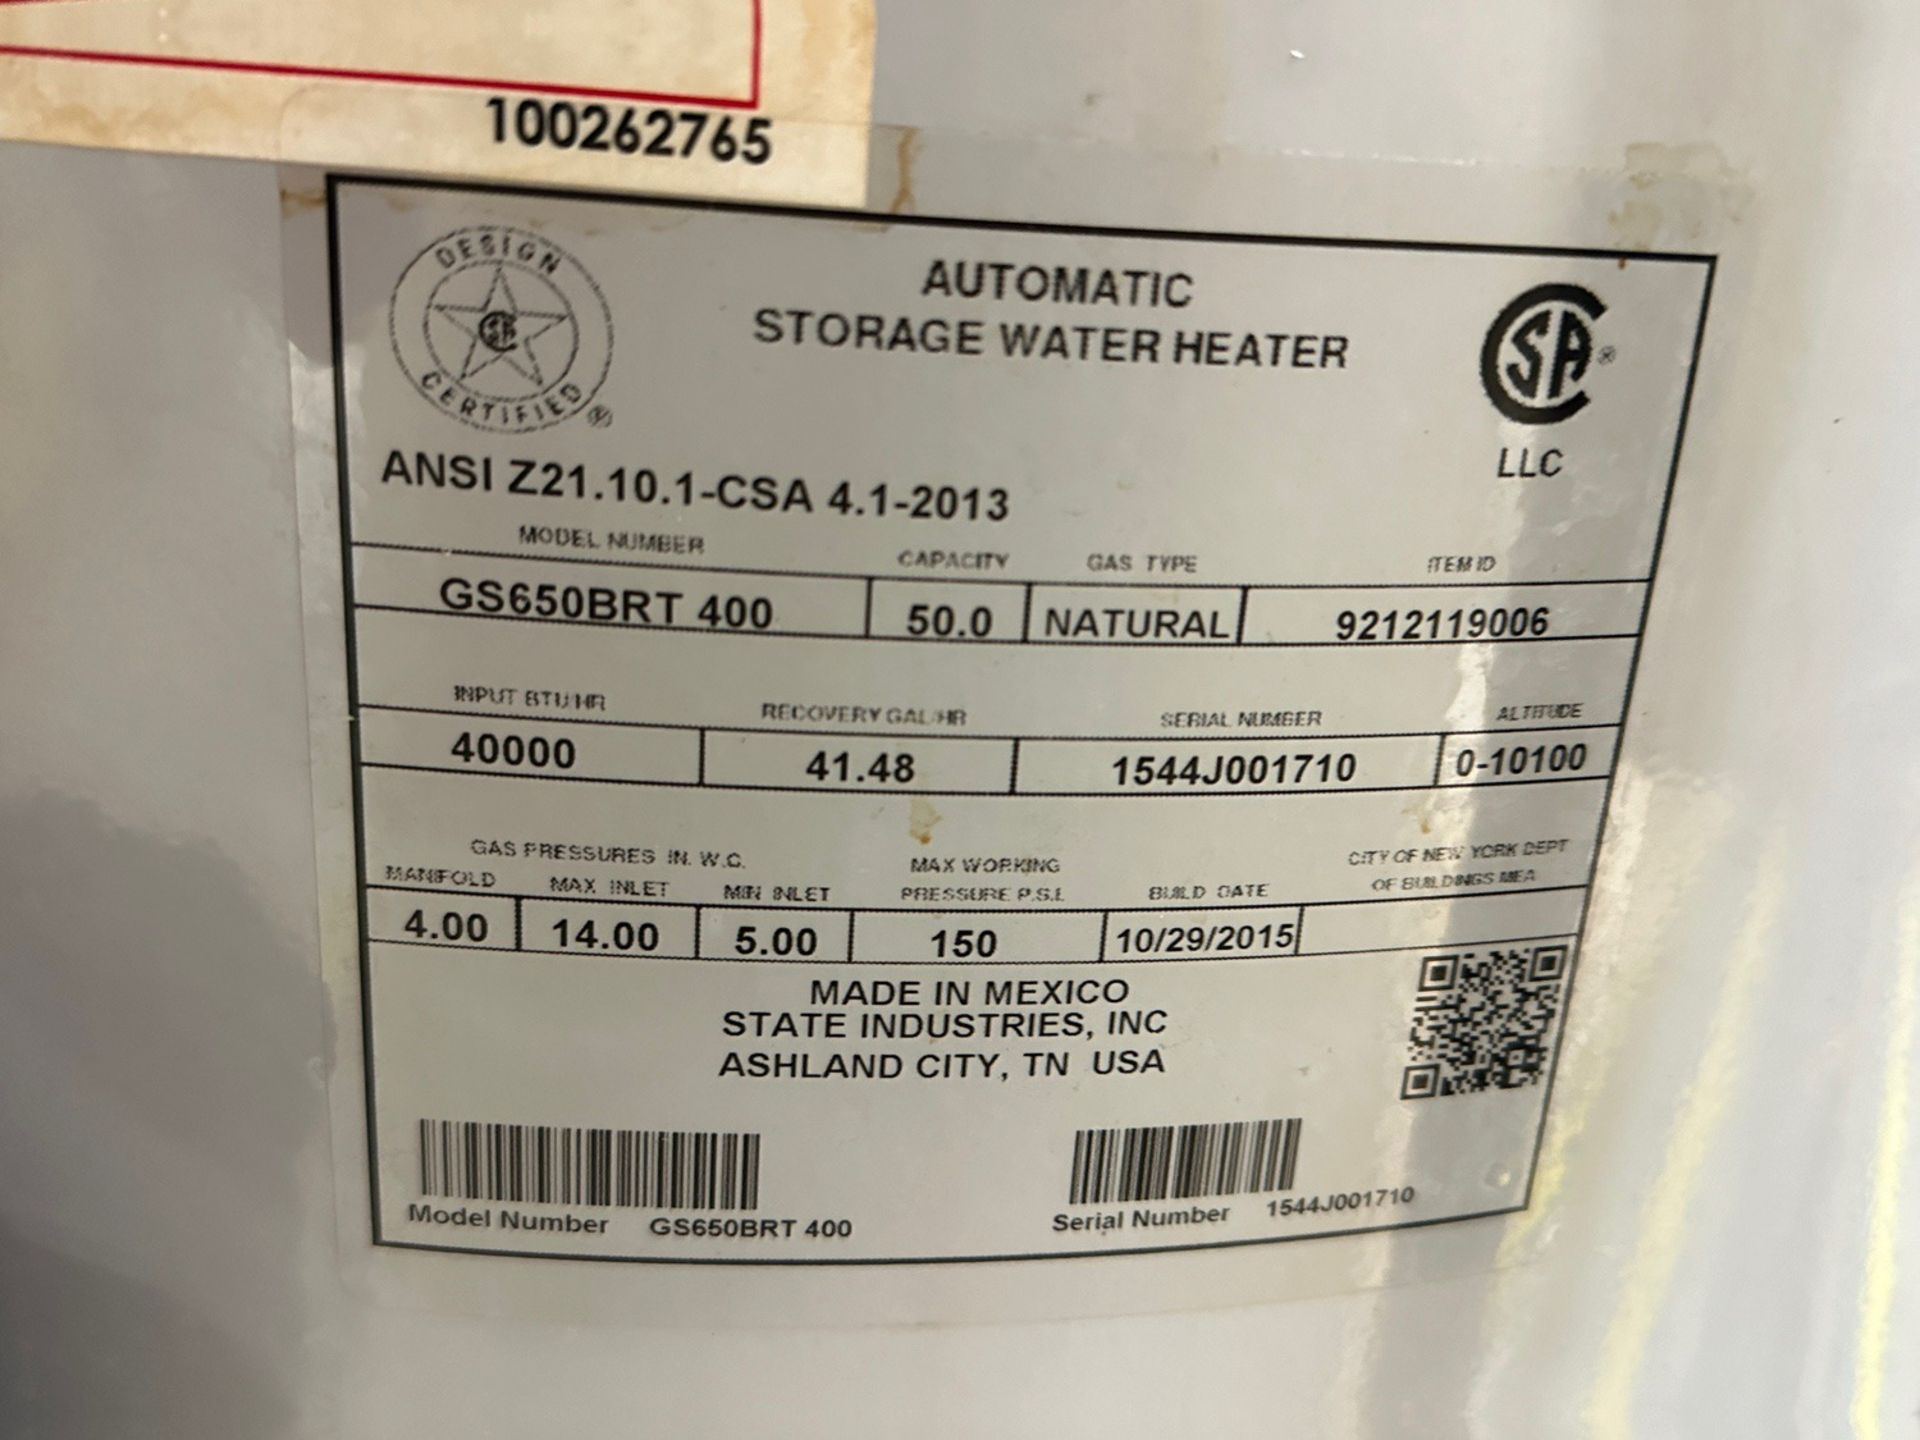 State Select 50 Gallon Water Heater - Model GS650BRT 400 | Rig Fee $100 - Image 2 of 3